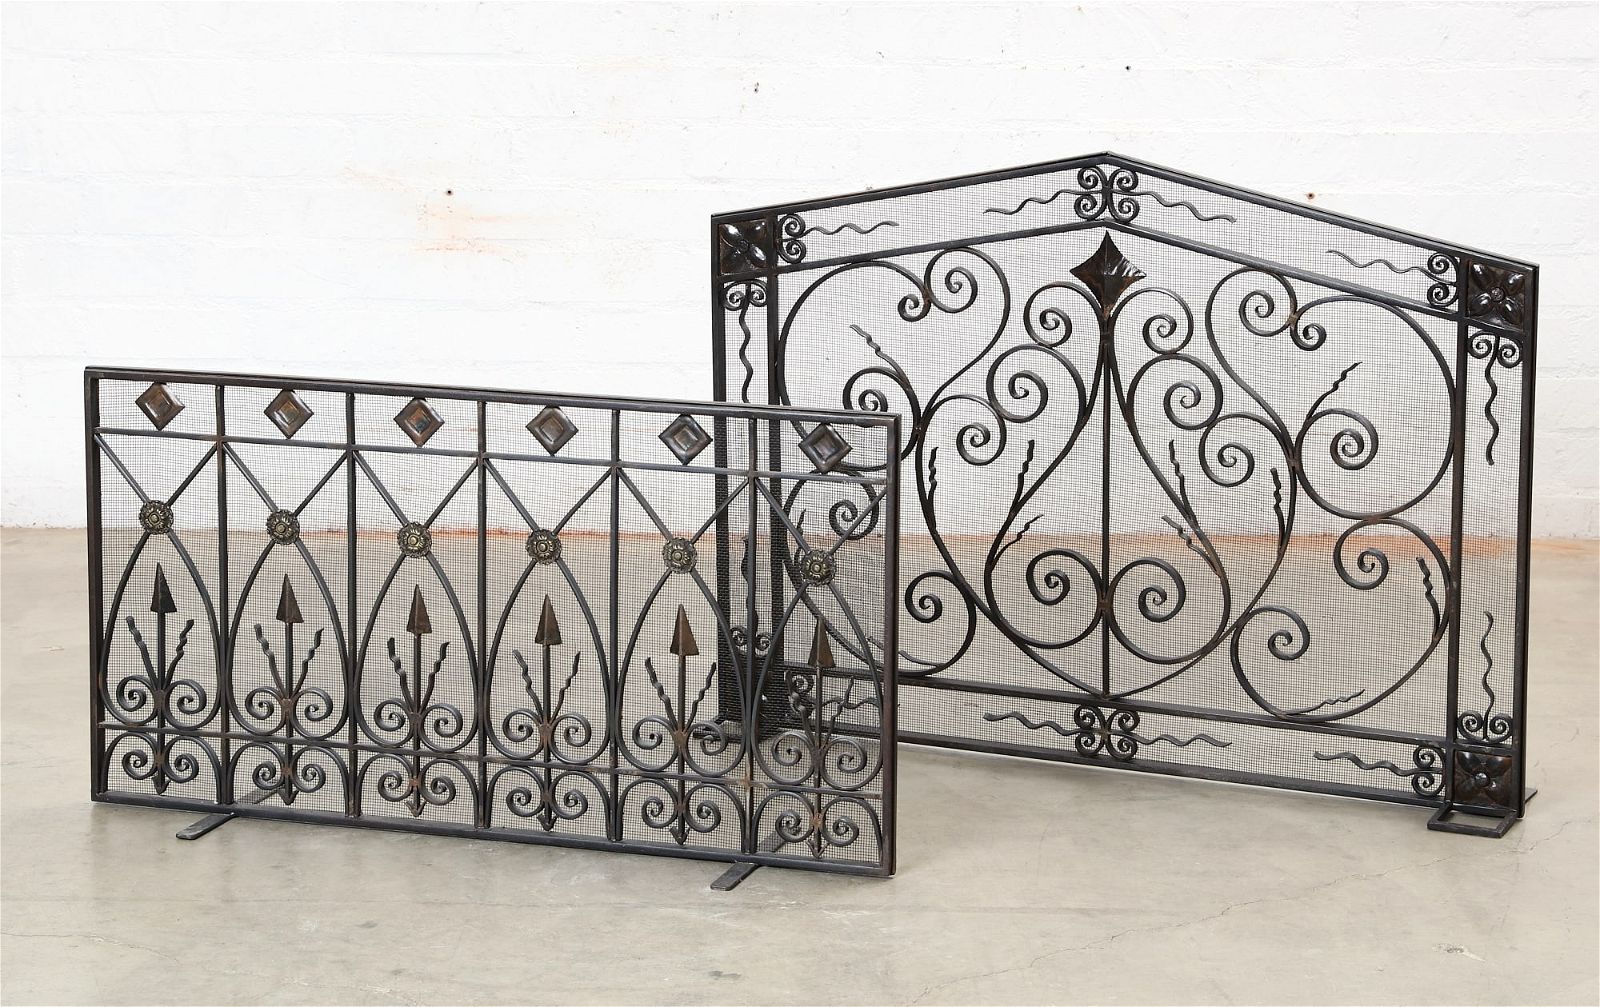 TWO WROUGHT IRON FIRE SCREENSTwo 2fb2cf2